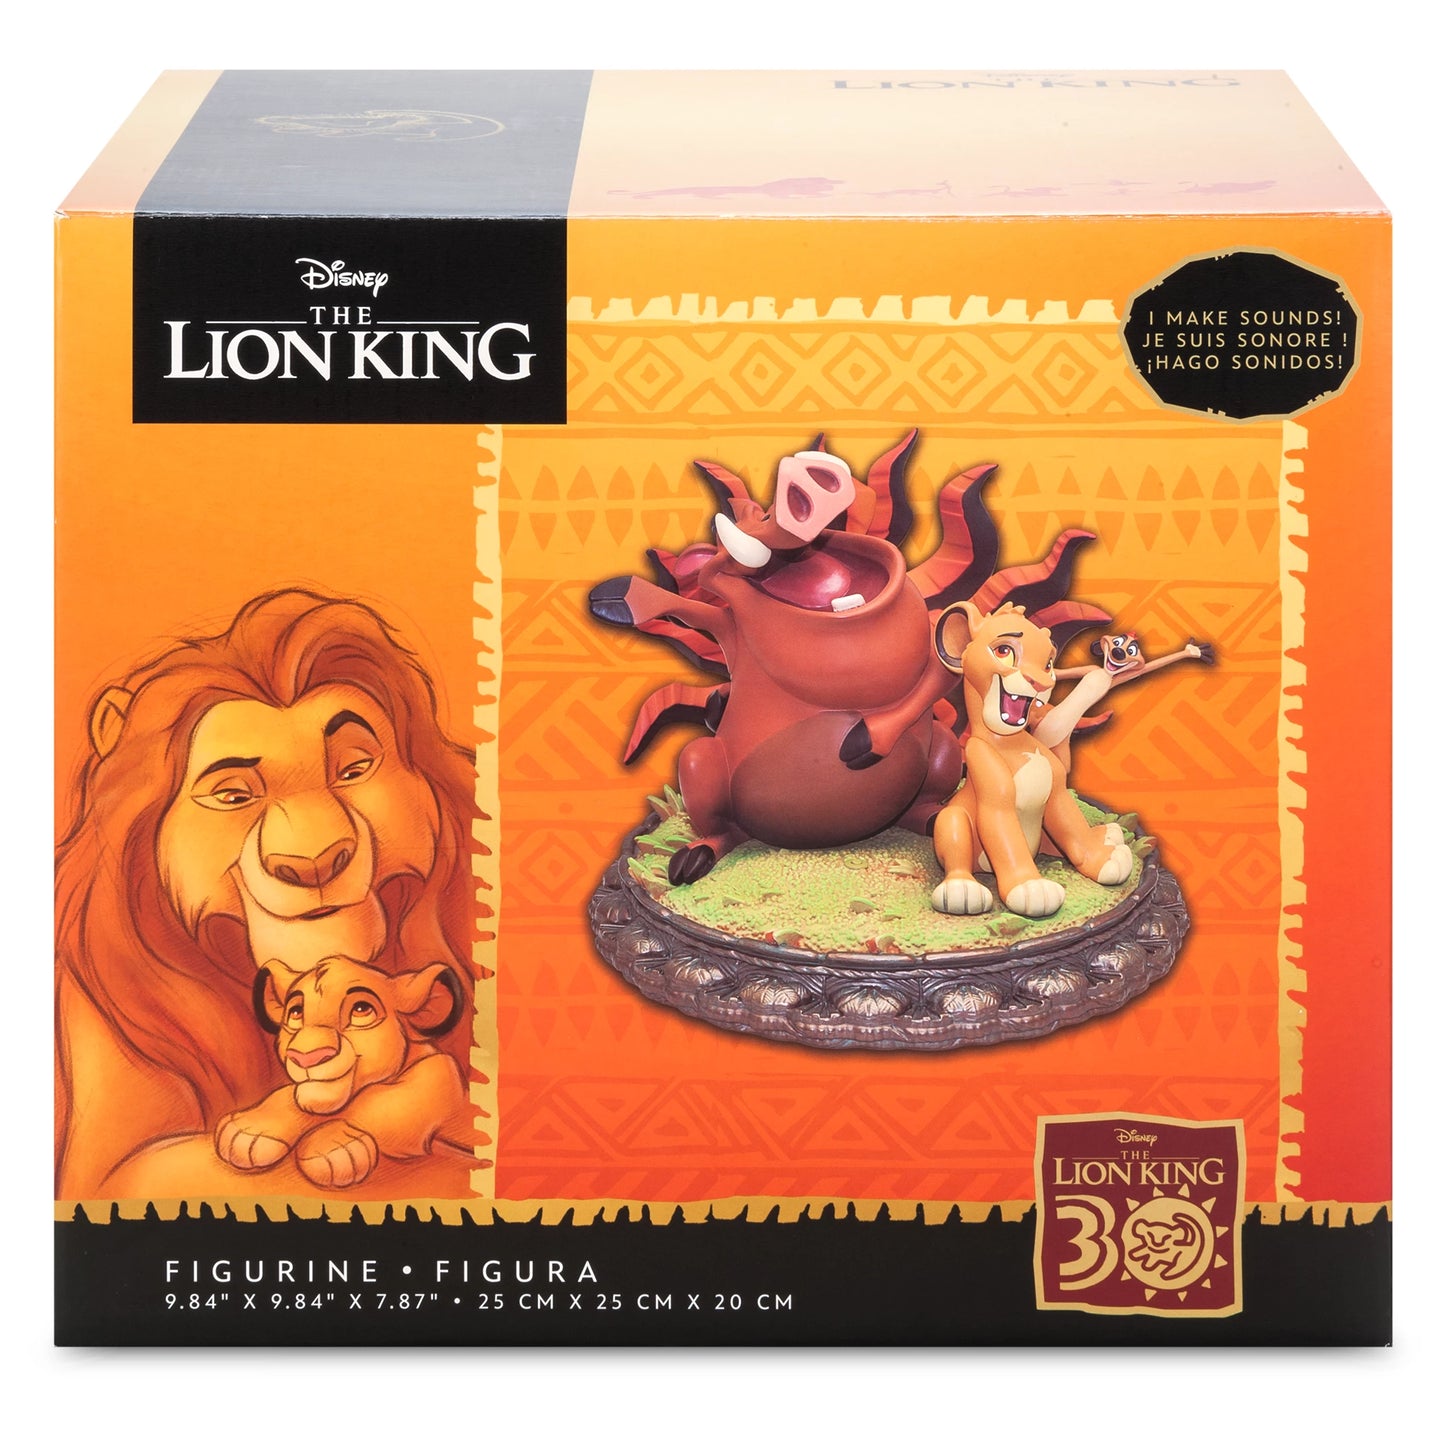 The Lion King 30th Anniversary Musical Figure